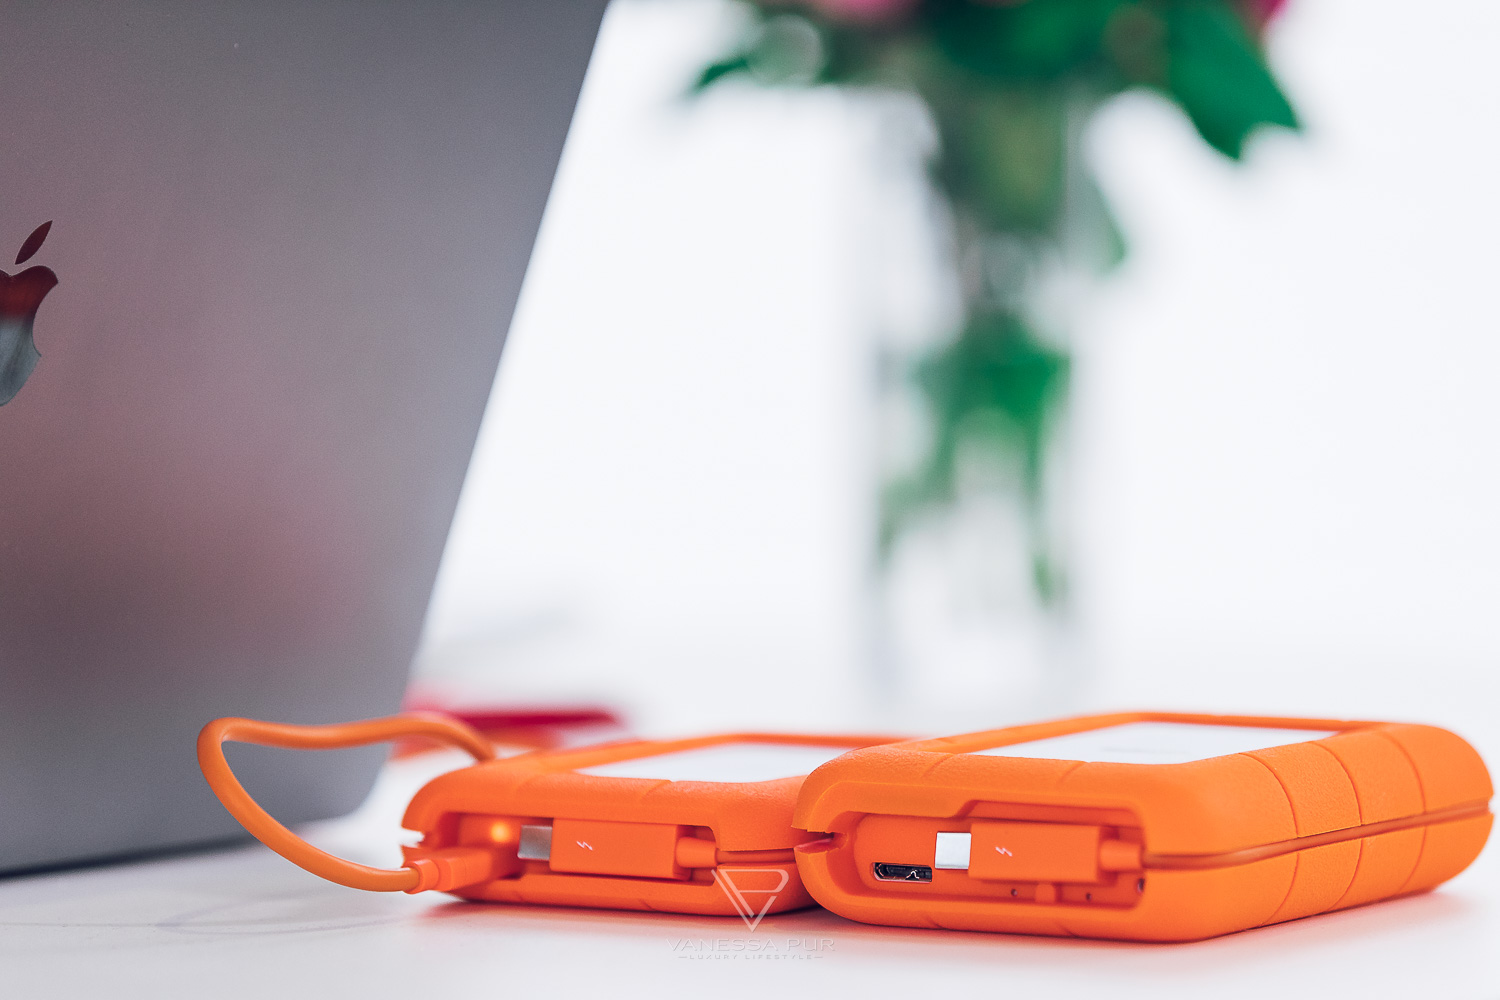 LaCie Rugged Thunderbolt USB 3.0 1TB SSD hard drive in review - high-speed for video editing? La Cie Rugged USB-C 1TB SSD external hard drive - review, experience and product test of the harddrive for youtuber, blogger, videographer and photographer - Tech Blog Vanessa Pur